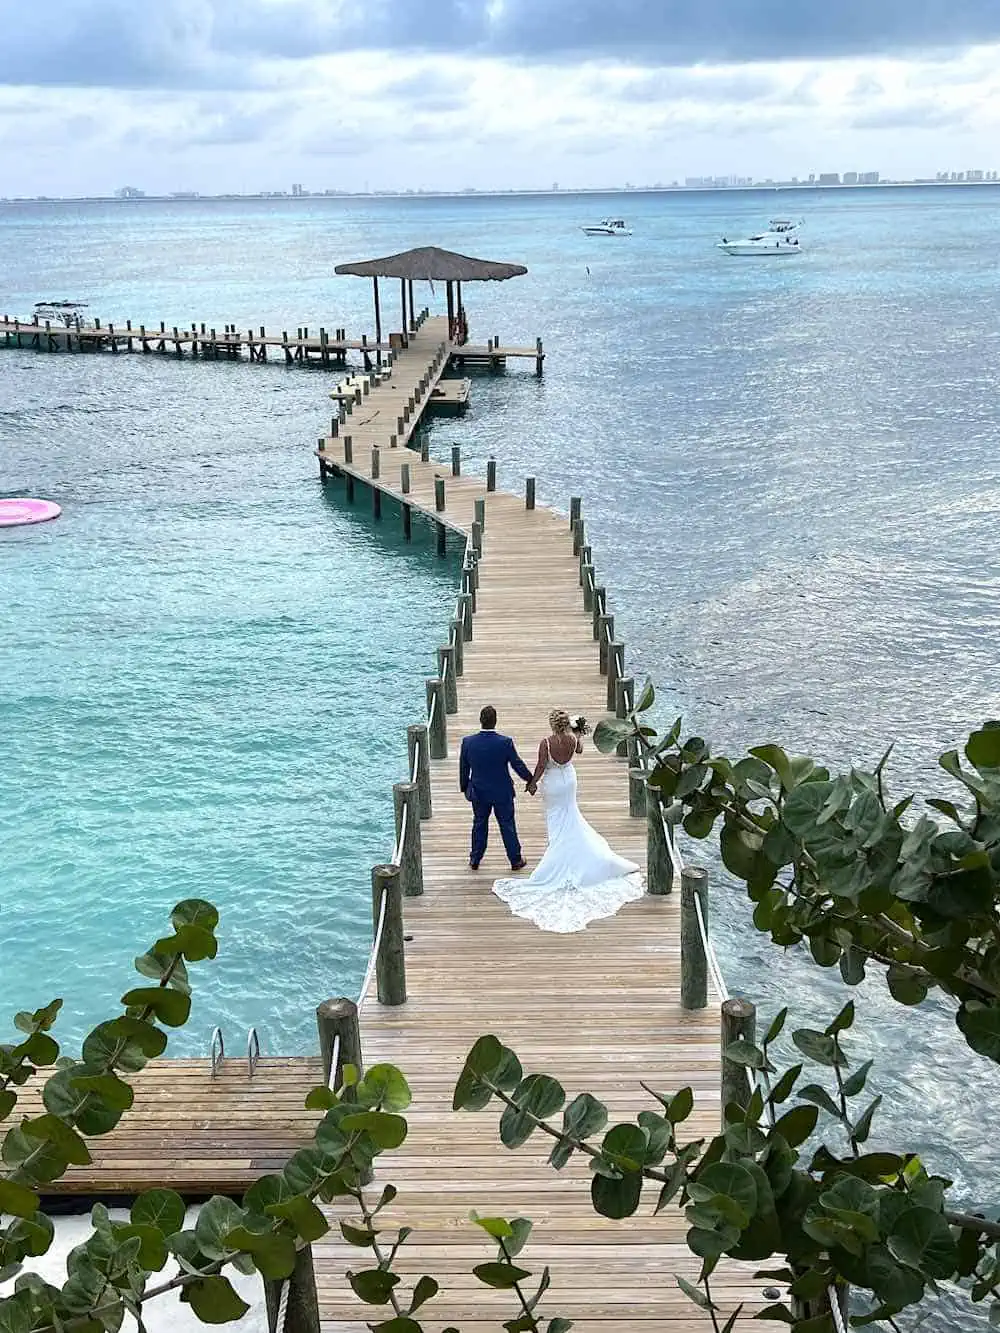 Couple on the wedding pier at Impression Isla Mujeres.